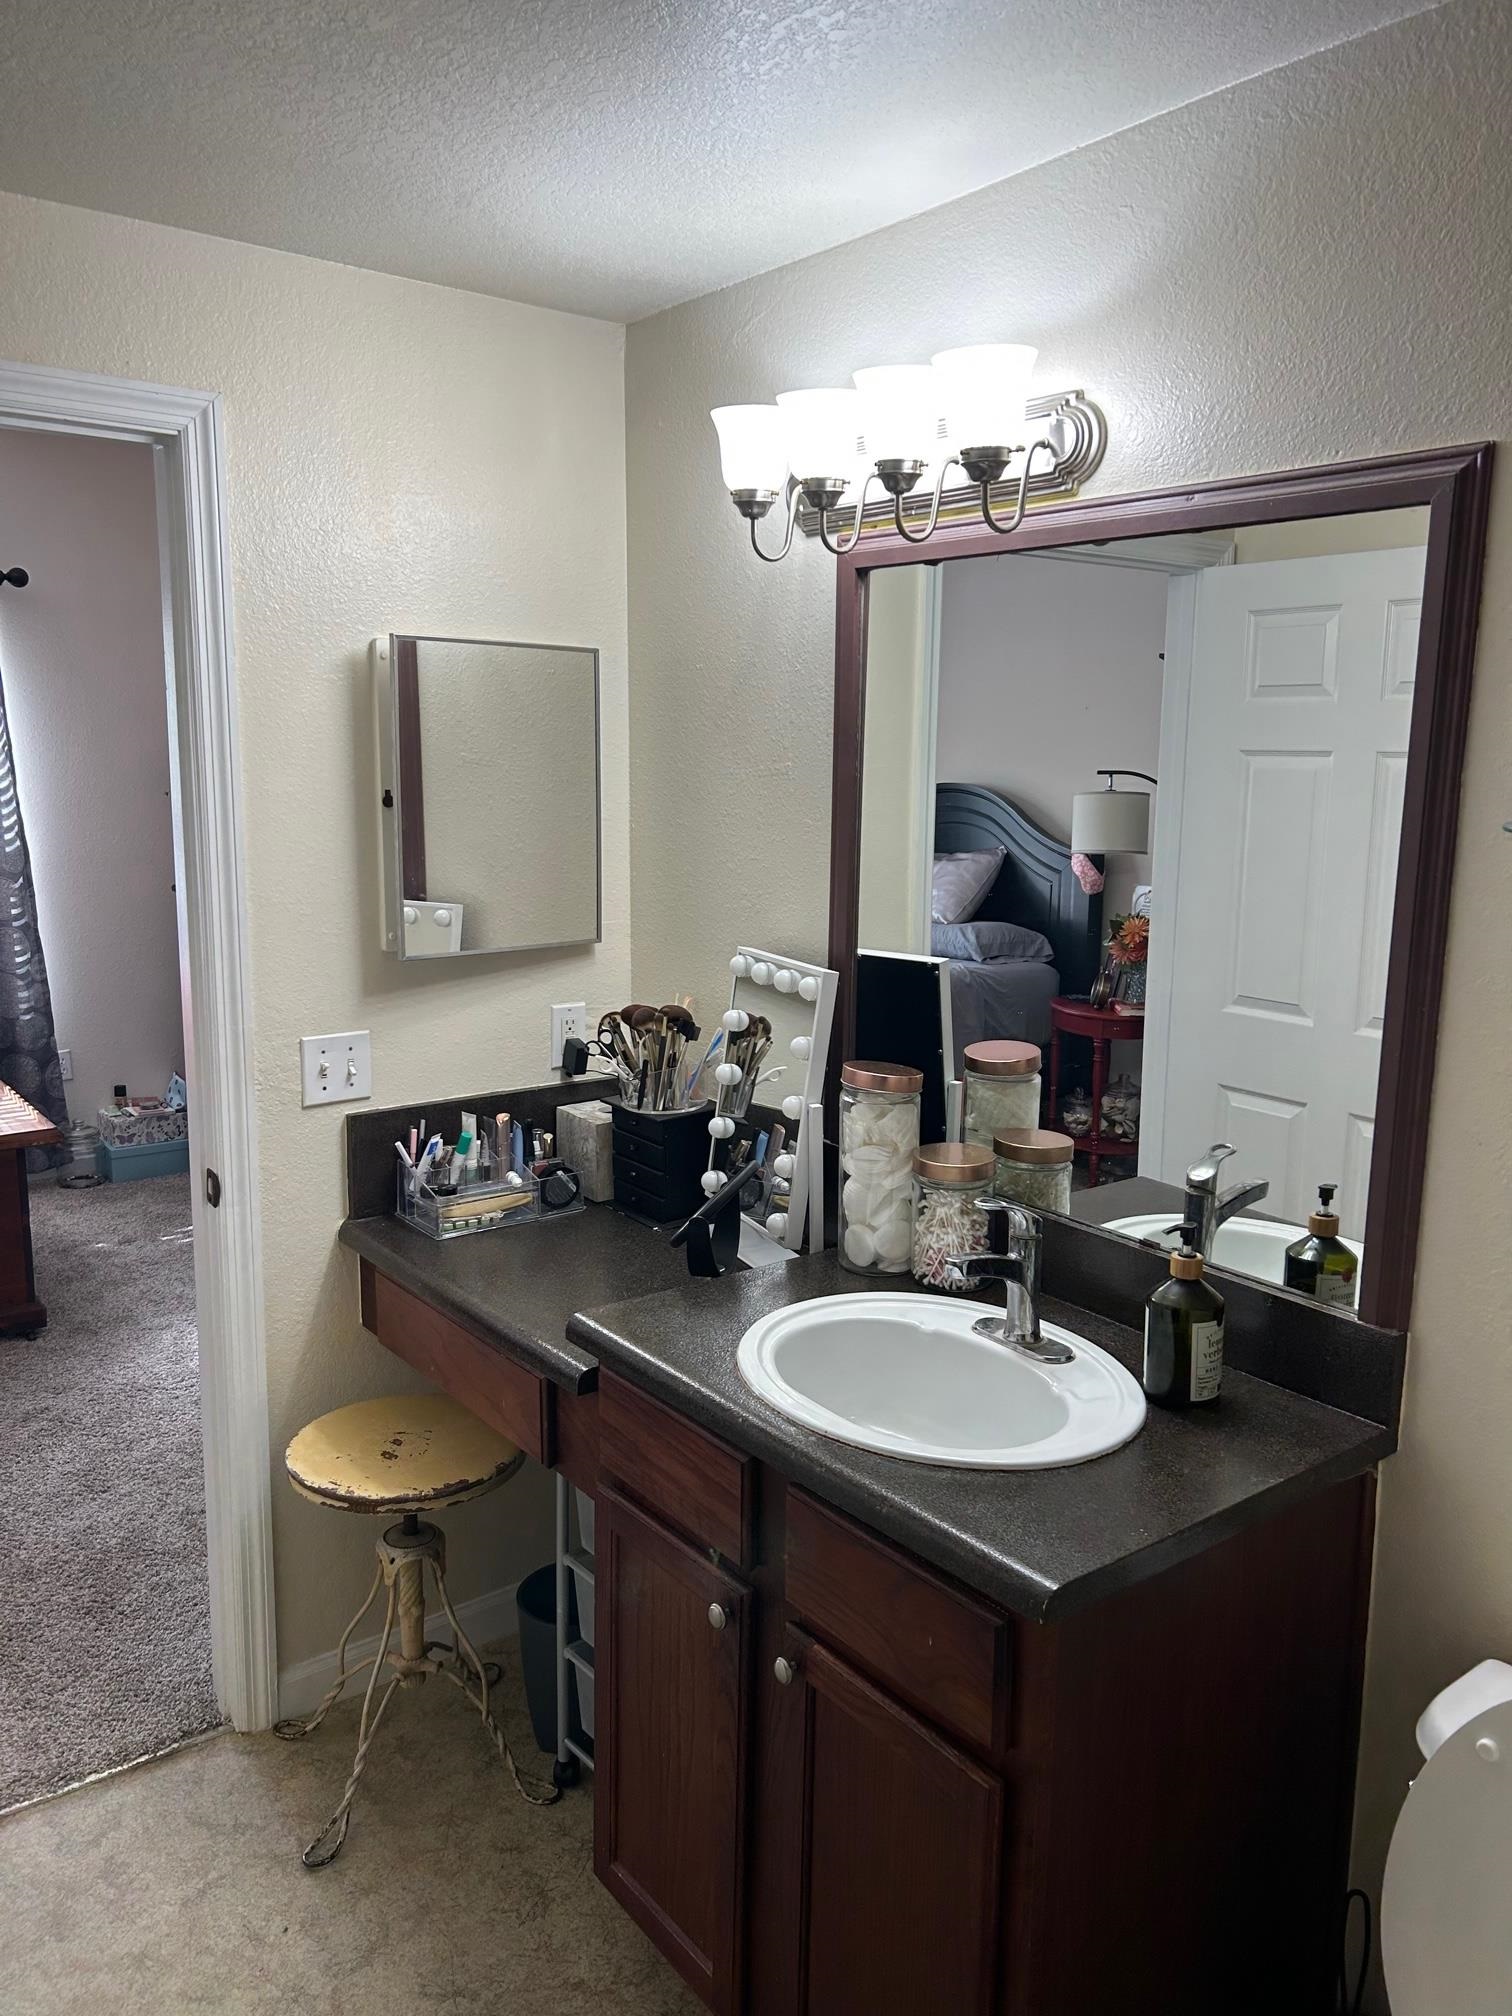 2801 Chancellorsville Dr Unit 424 Drive,TALLAHASSEE,Florida 32312,1 Bedroom Bedrooms,1 BathroomBathrooms,Condo,2801 Chancellorsville Dr Unit 424 Drive,364411